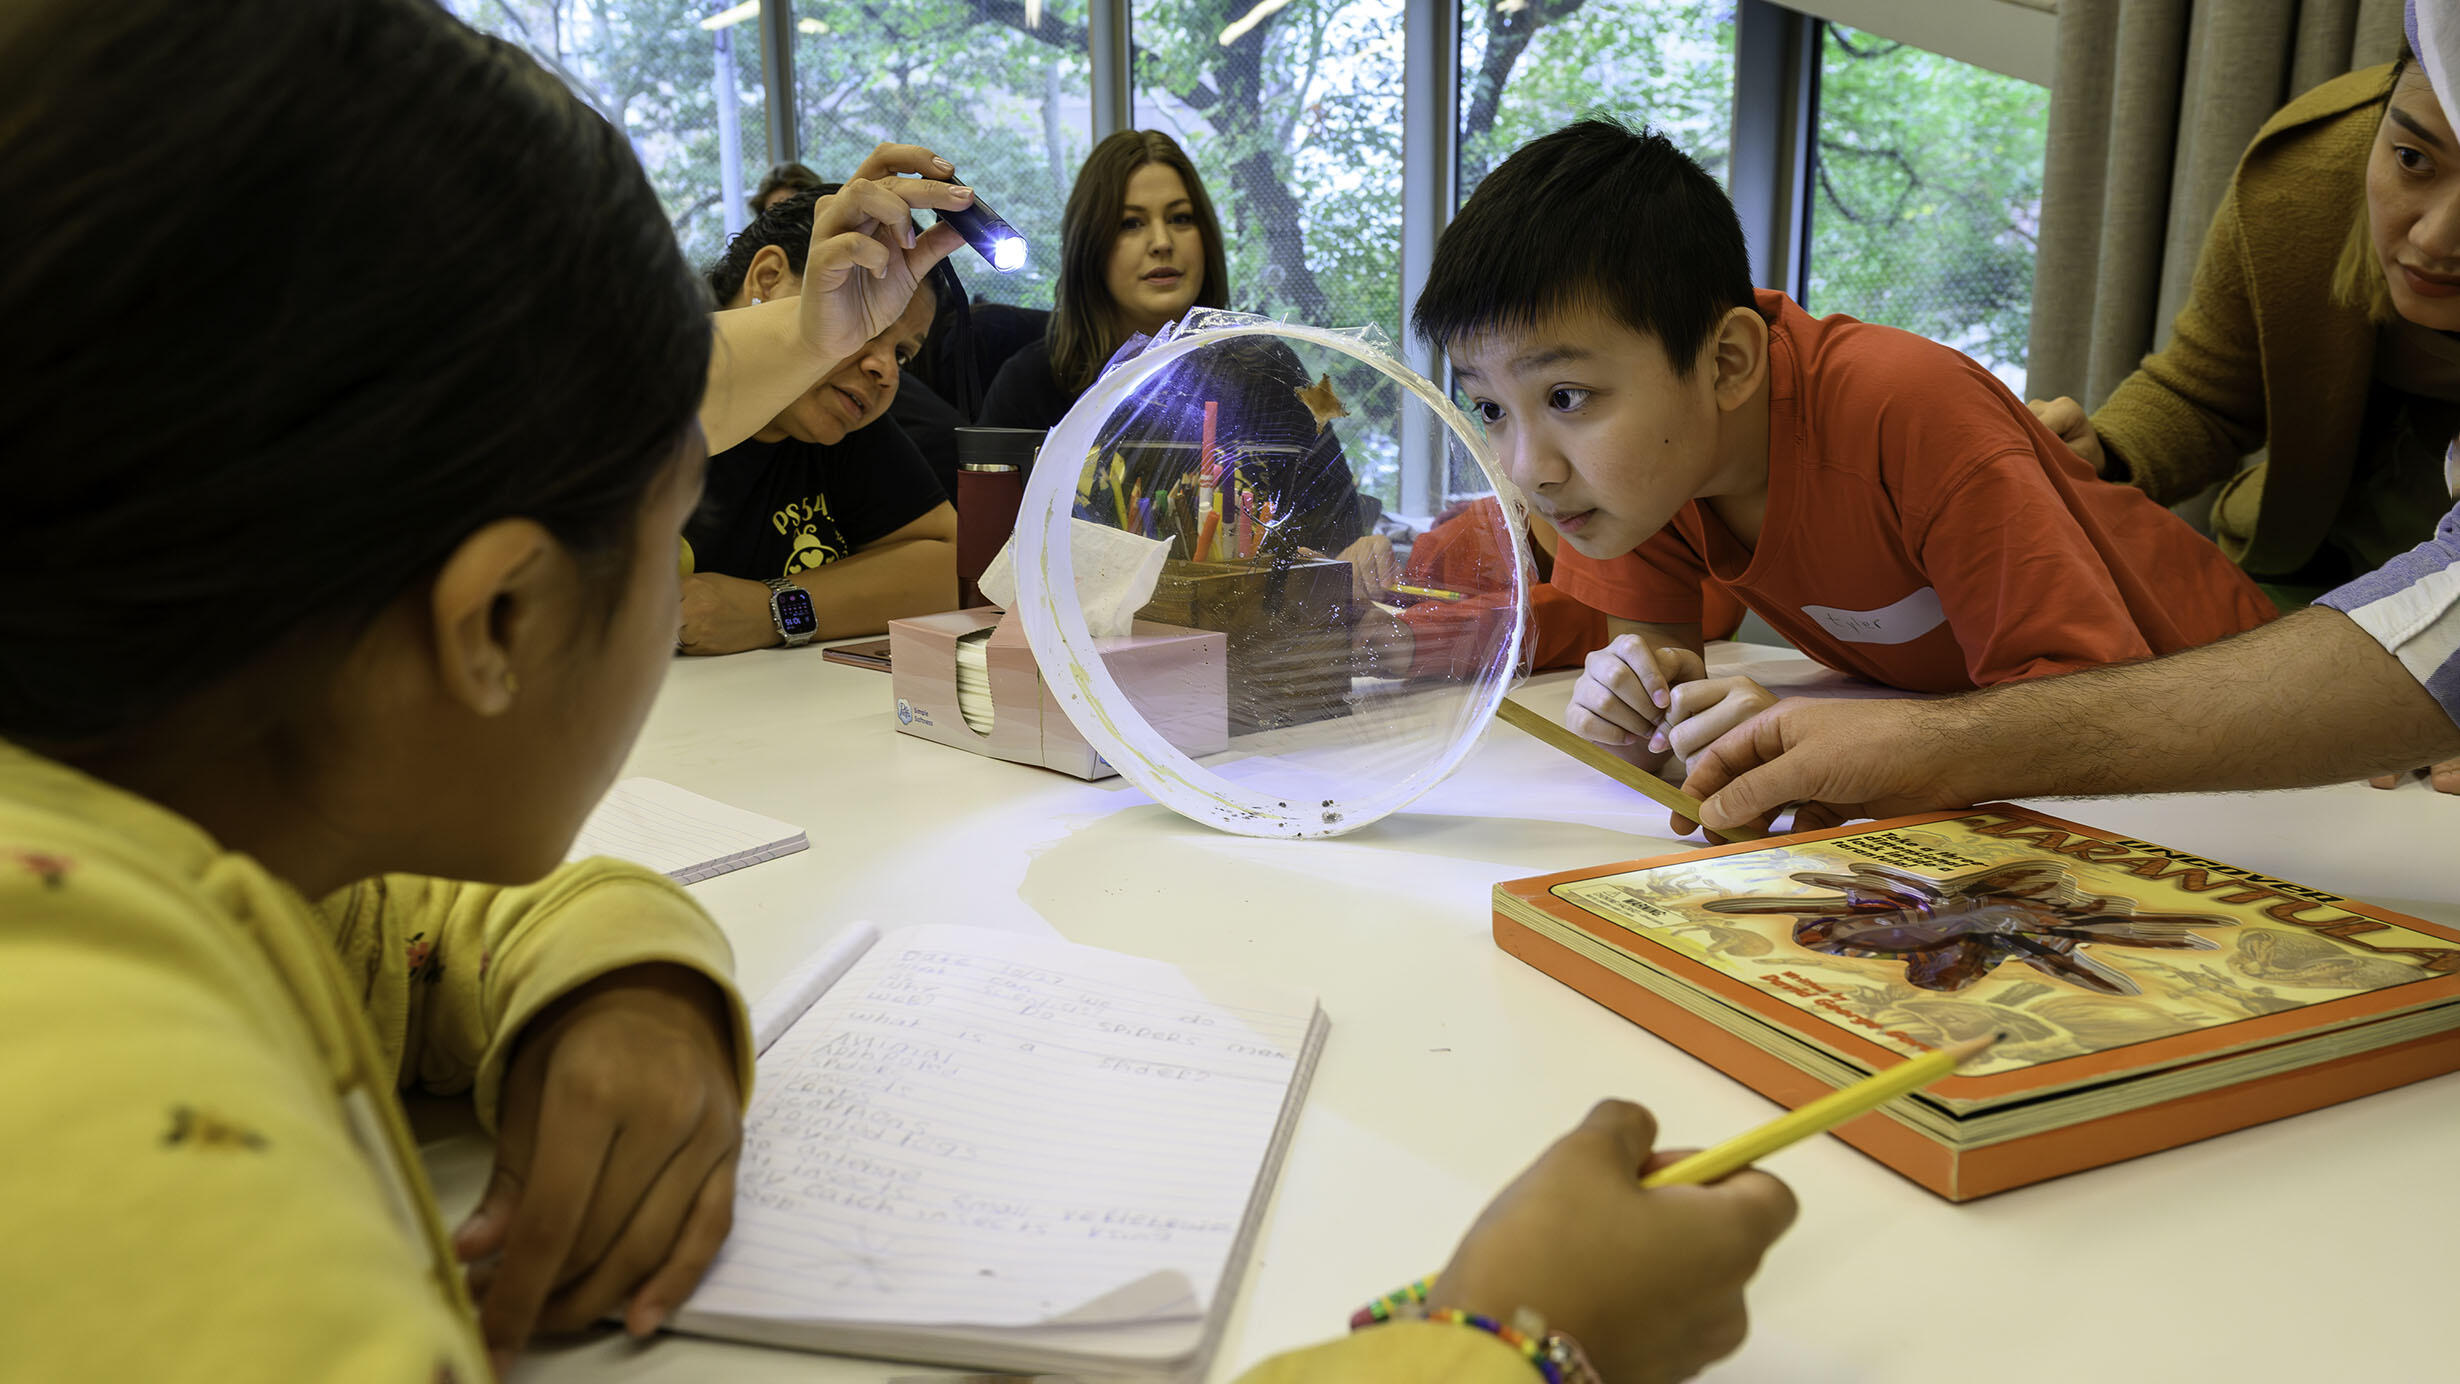 Two young students and three adults sit around a large table observe a spider in a round container at the center of the table.